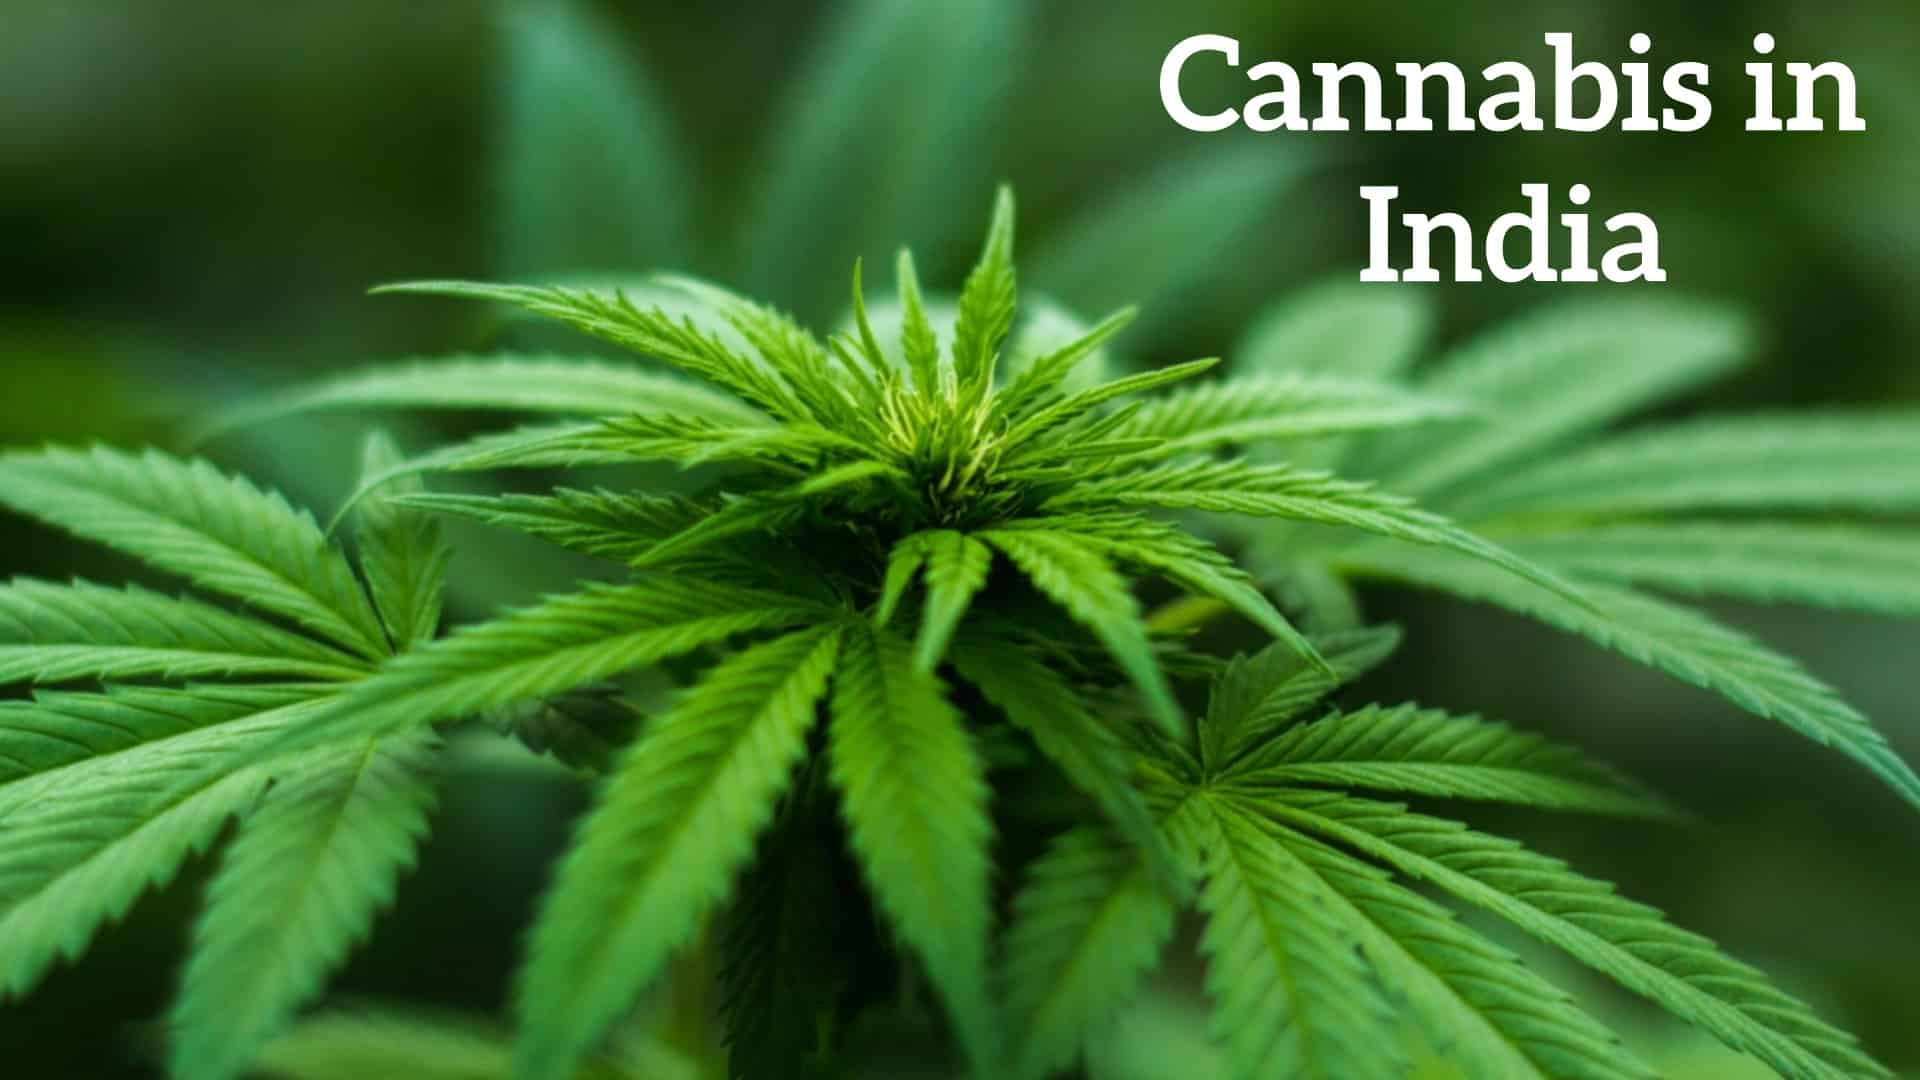 History of Cannabis in India